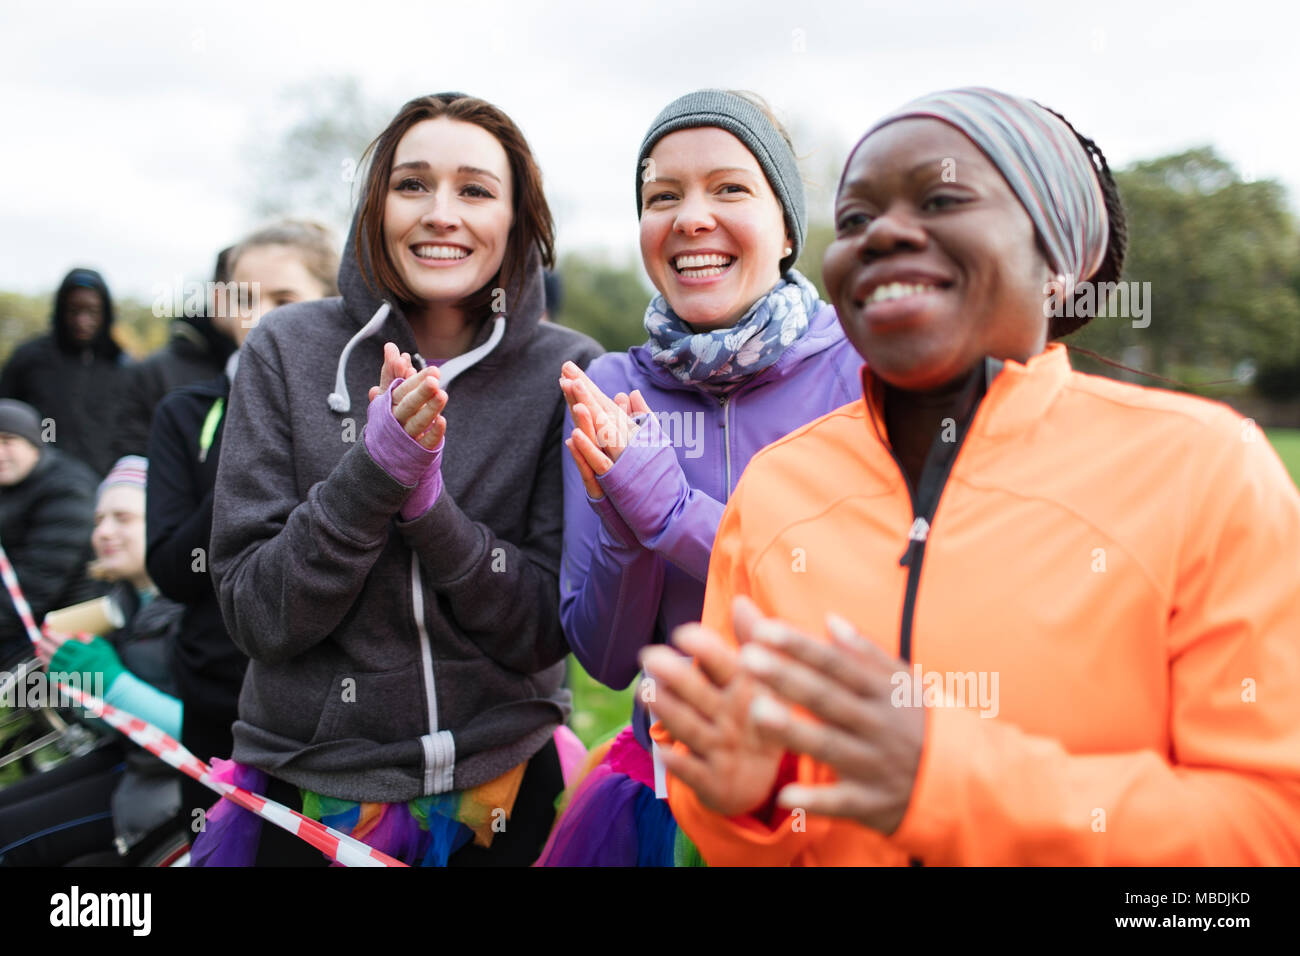 Female spectators clapping at charity run Stock Photo